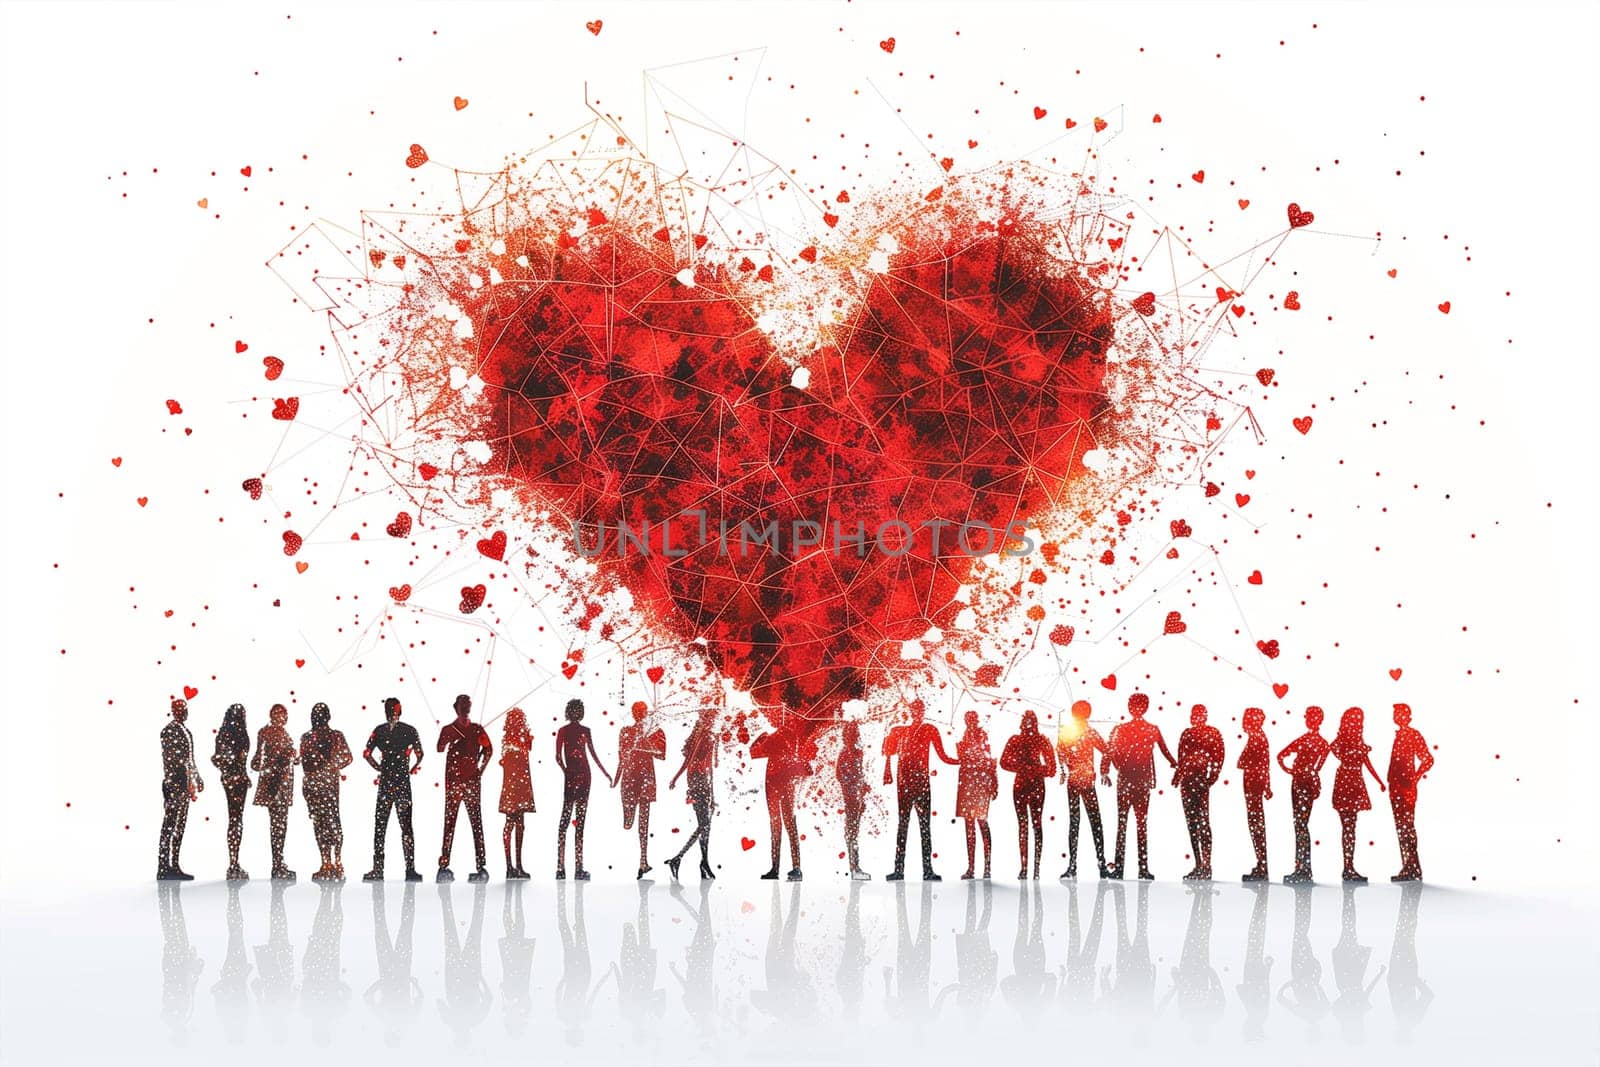 A group of diverse individuals standing together in front of a large heart structure, symbolizing unity and love.